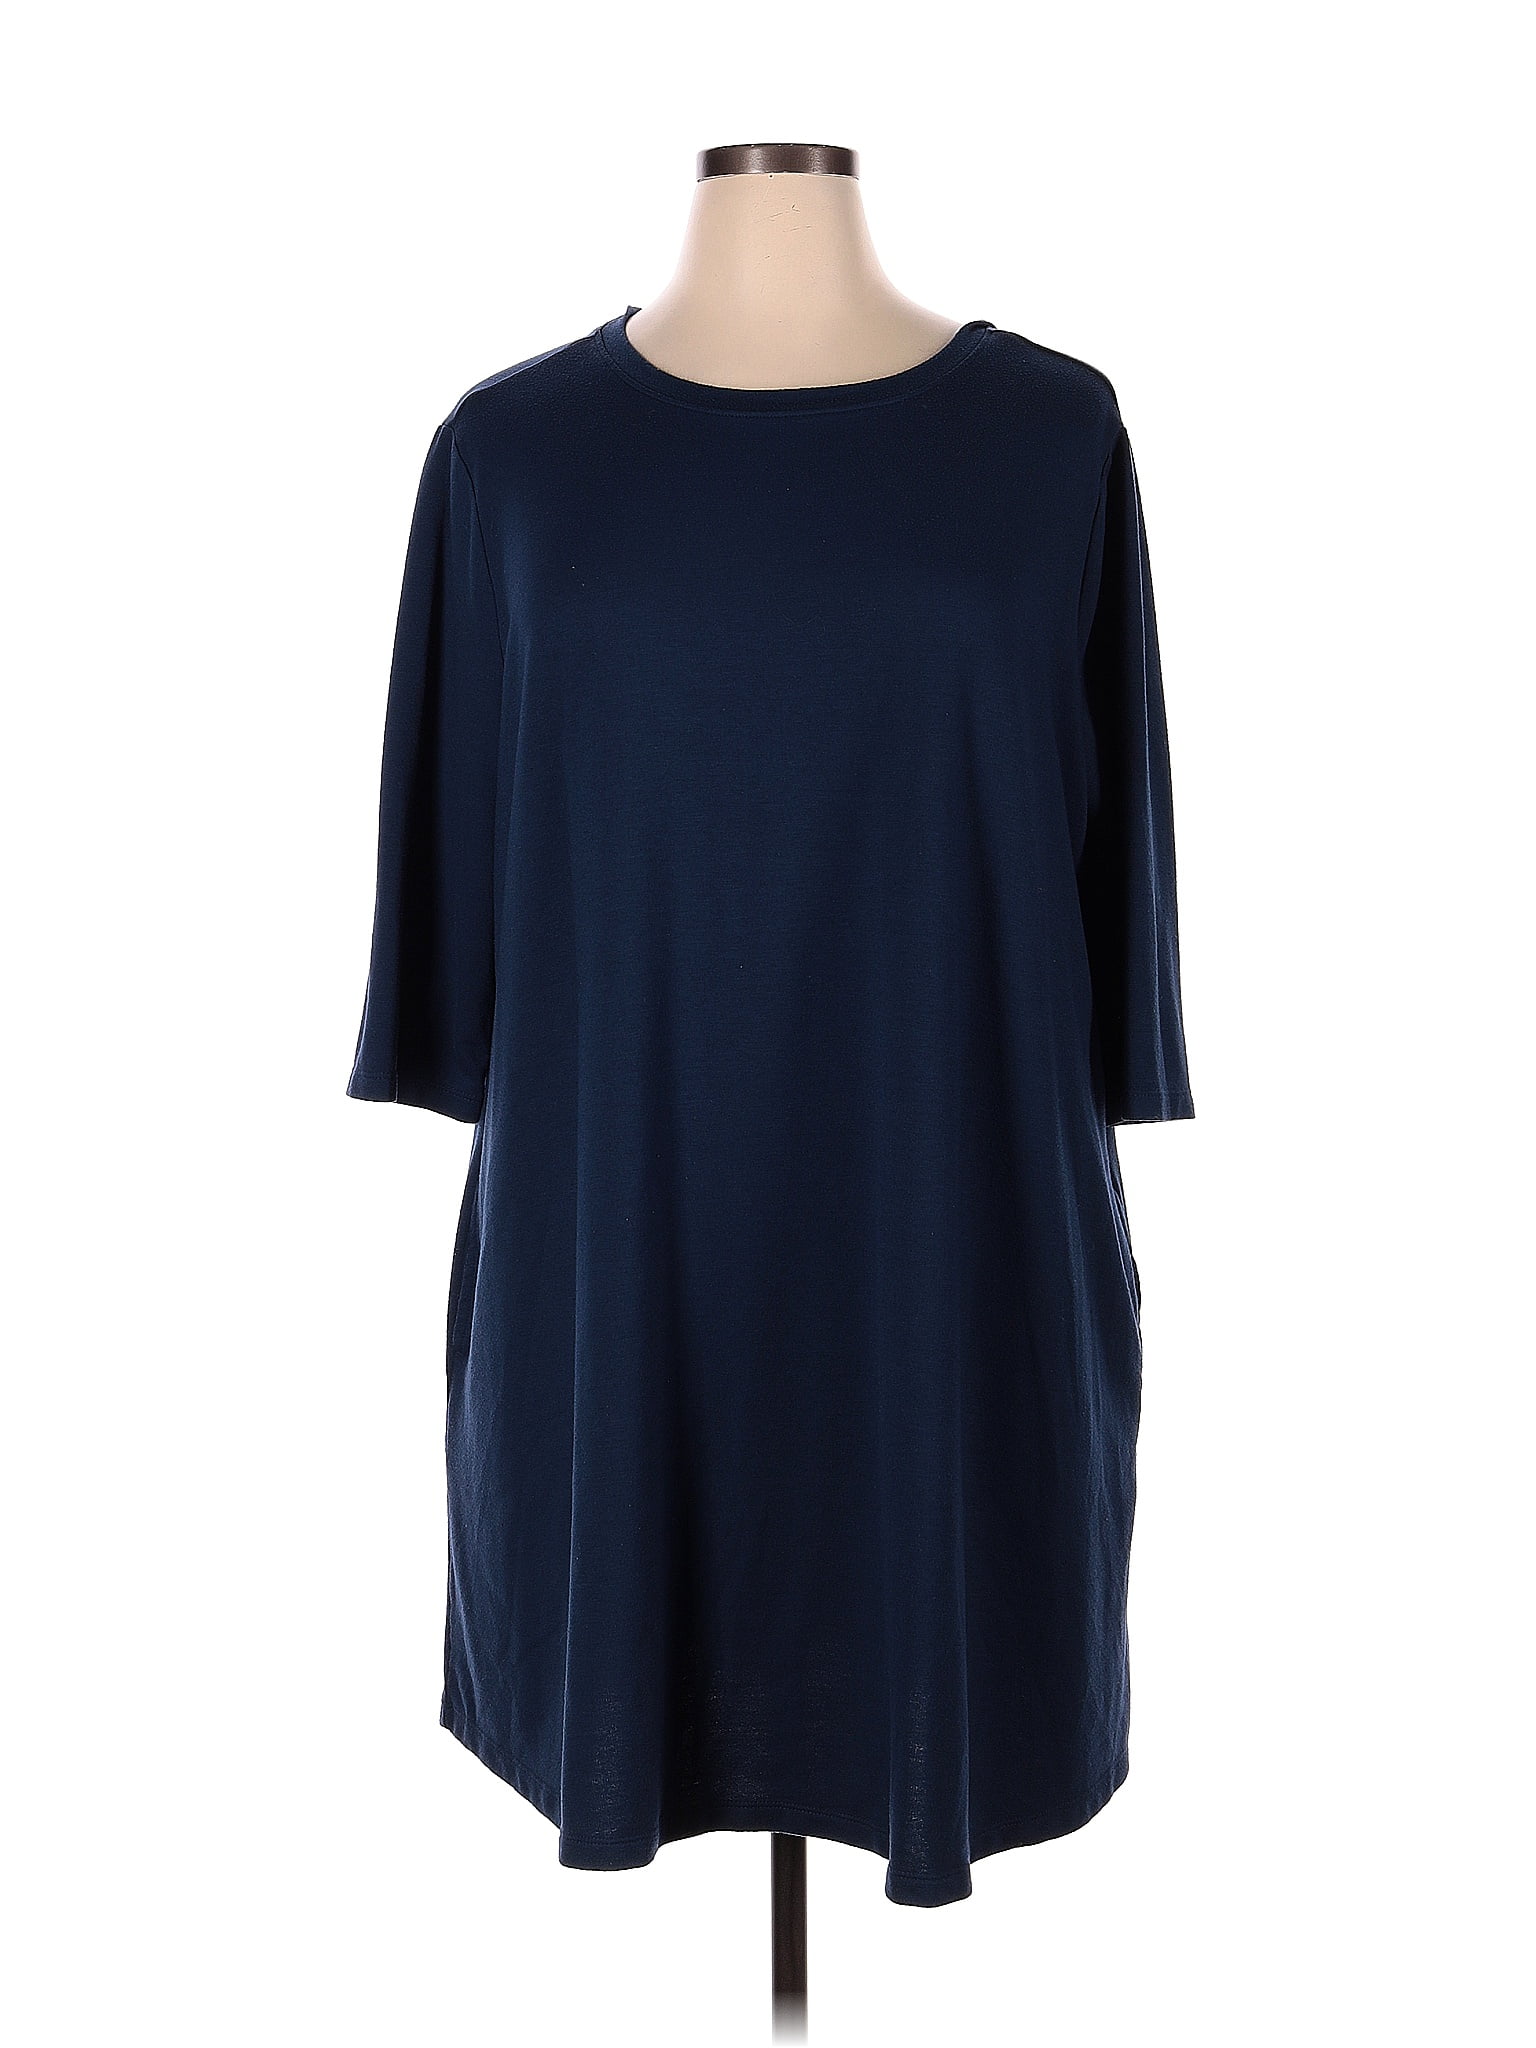 Terra & Sky Color Block Solid Navy Blue Casual Dress Size 1X (Plus) - 44%  off